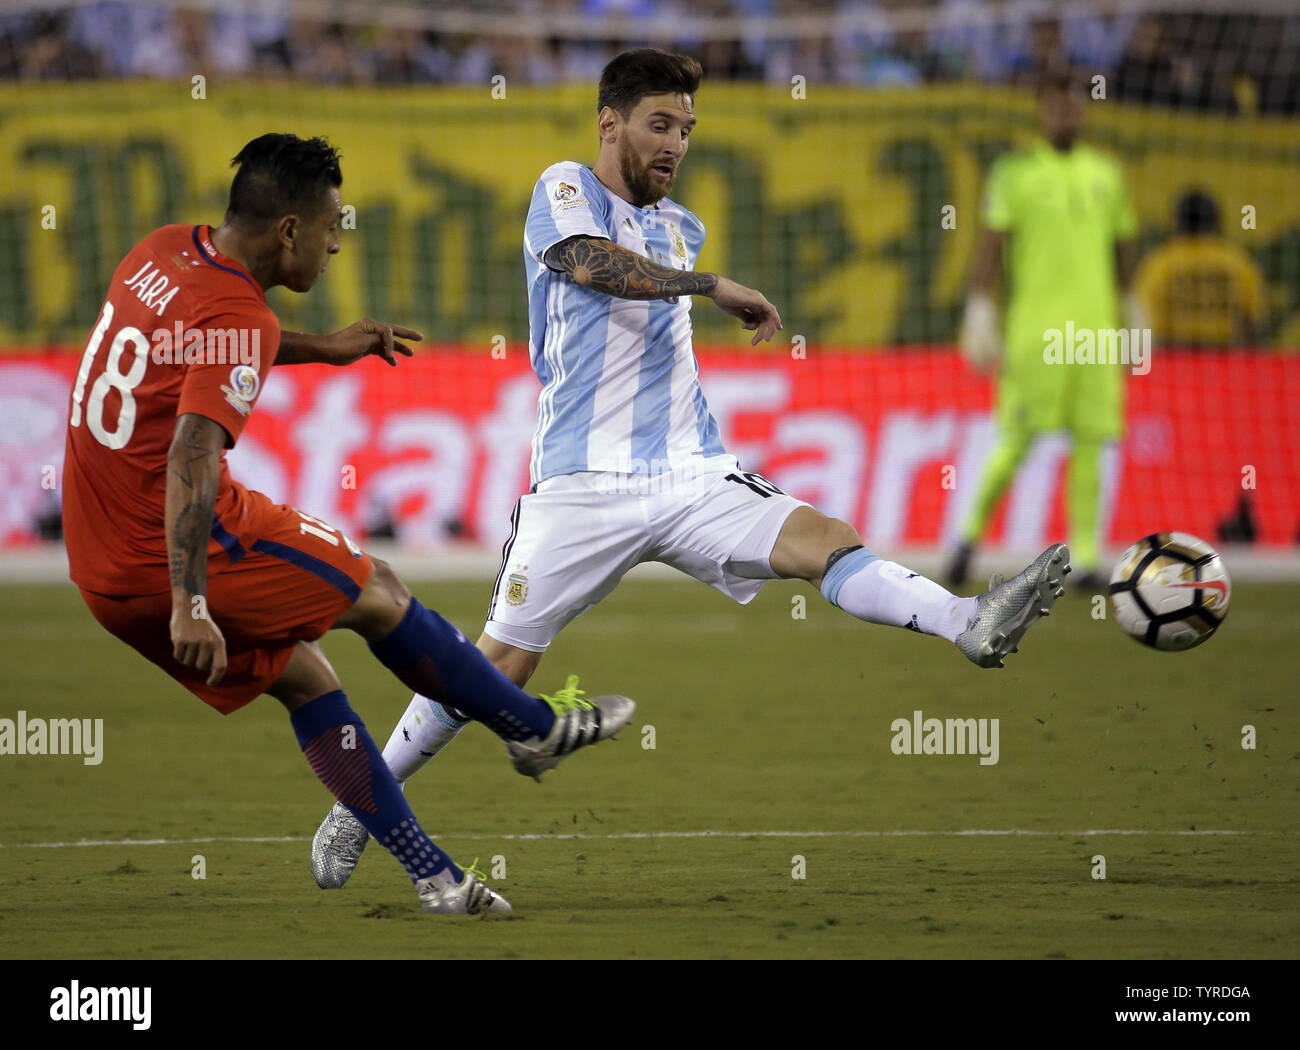 Argentina midfielder Lionel Messi (10) passes the ball around Chile defender Gonzalo Jara (18) in the second half at the Copa America Centenario USA 2016 Finals at MetLife Stadium in East Rutherford, New Jersey on June 26, 2016.      Photo by Ray Stubblebine/UPI Stock Photo